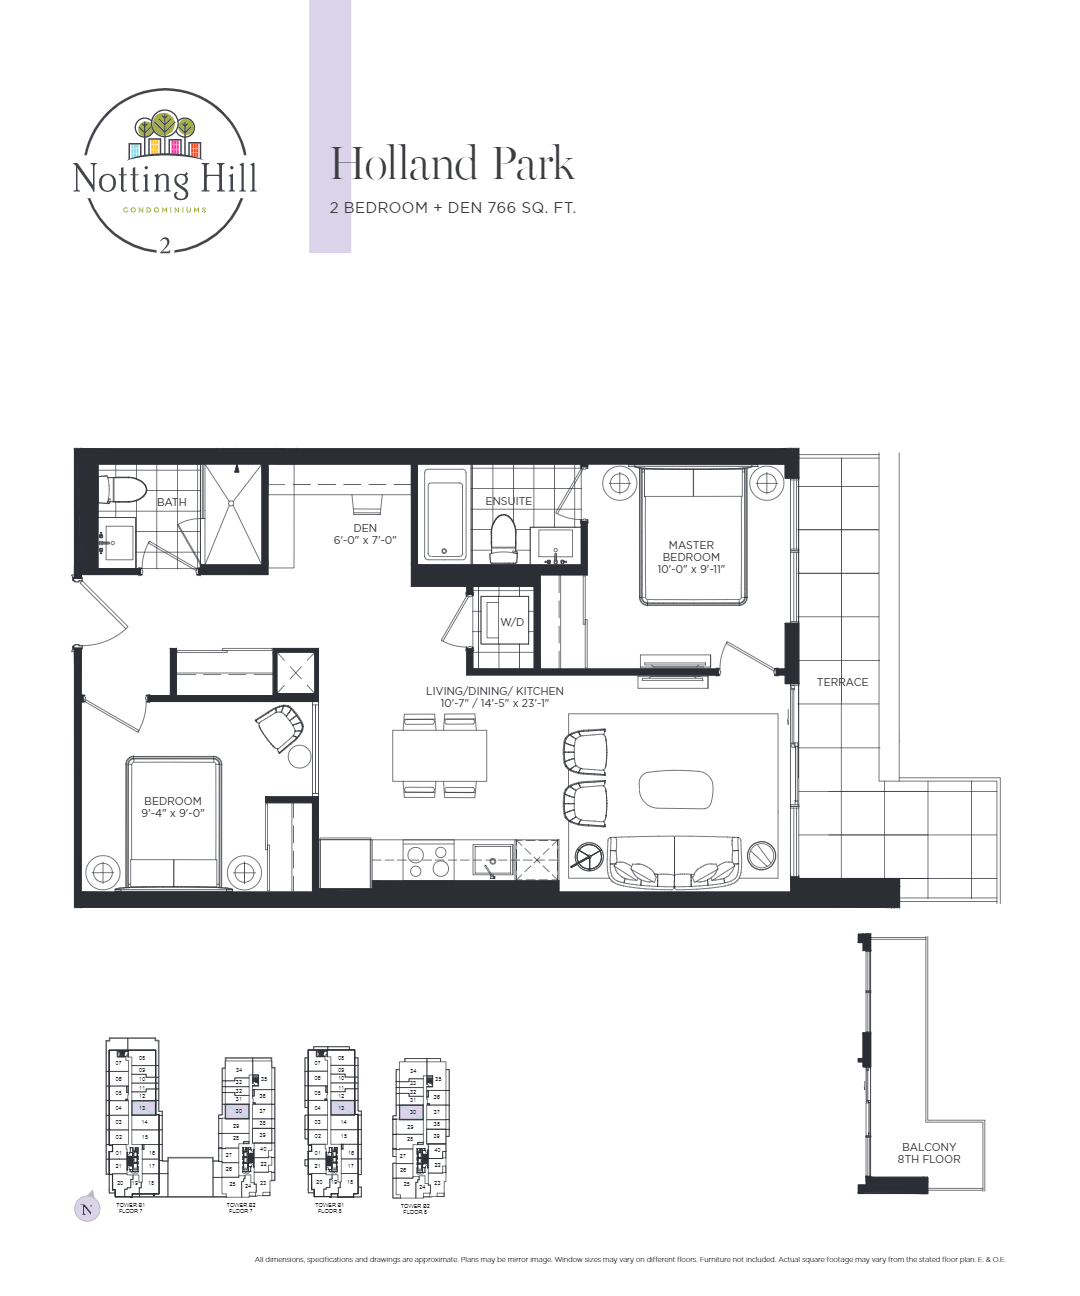  Floor Plan of Notting Hill Condos with undefined beds